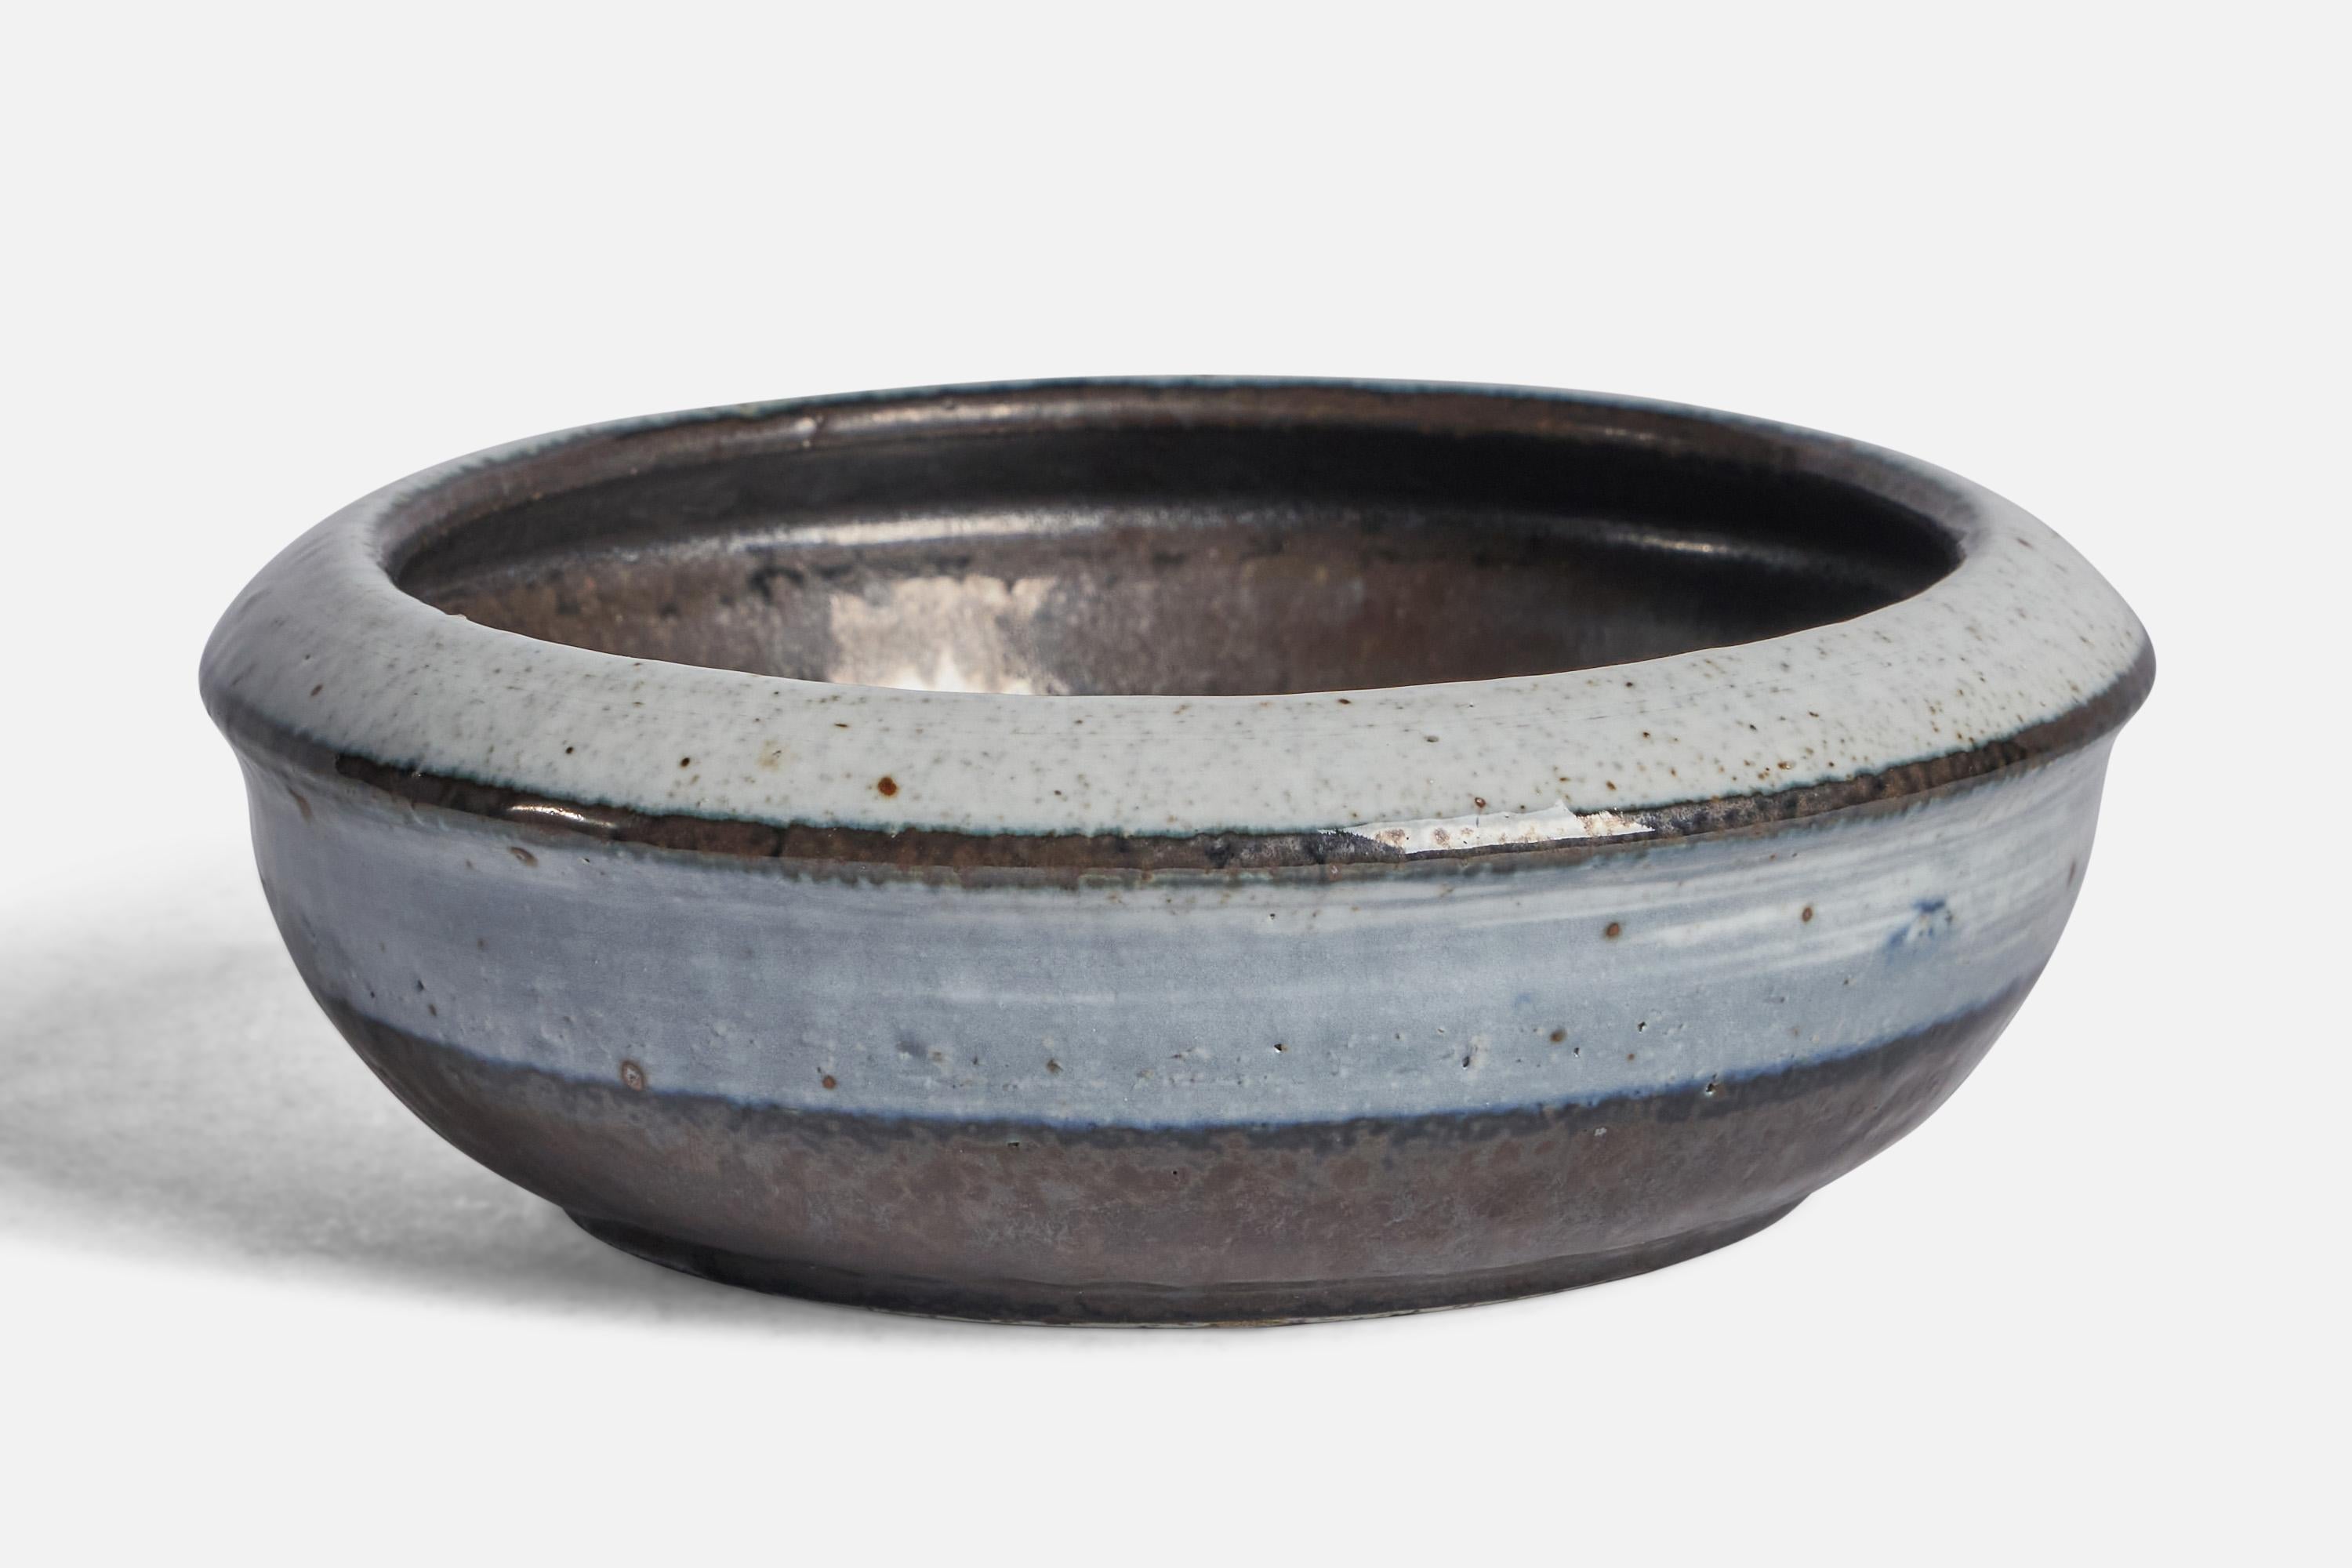 A grey and black-glazed stoneware bowl designed by Drejargruppen and produced by Rörstrand, Sweden, 1974.
